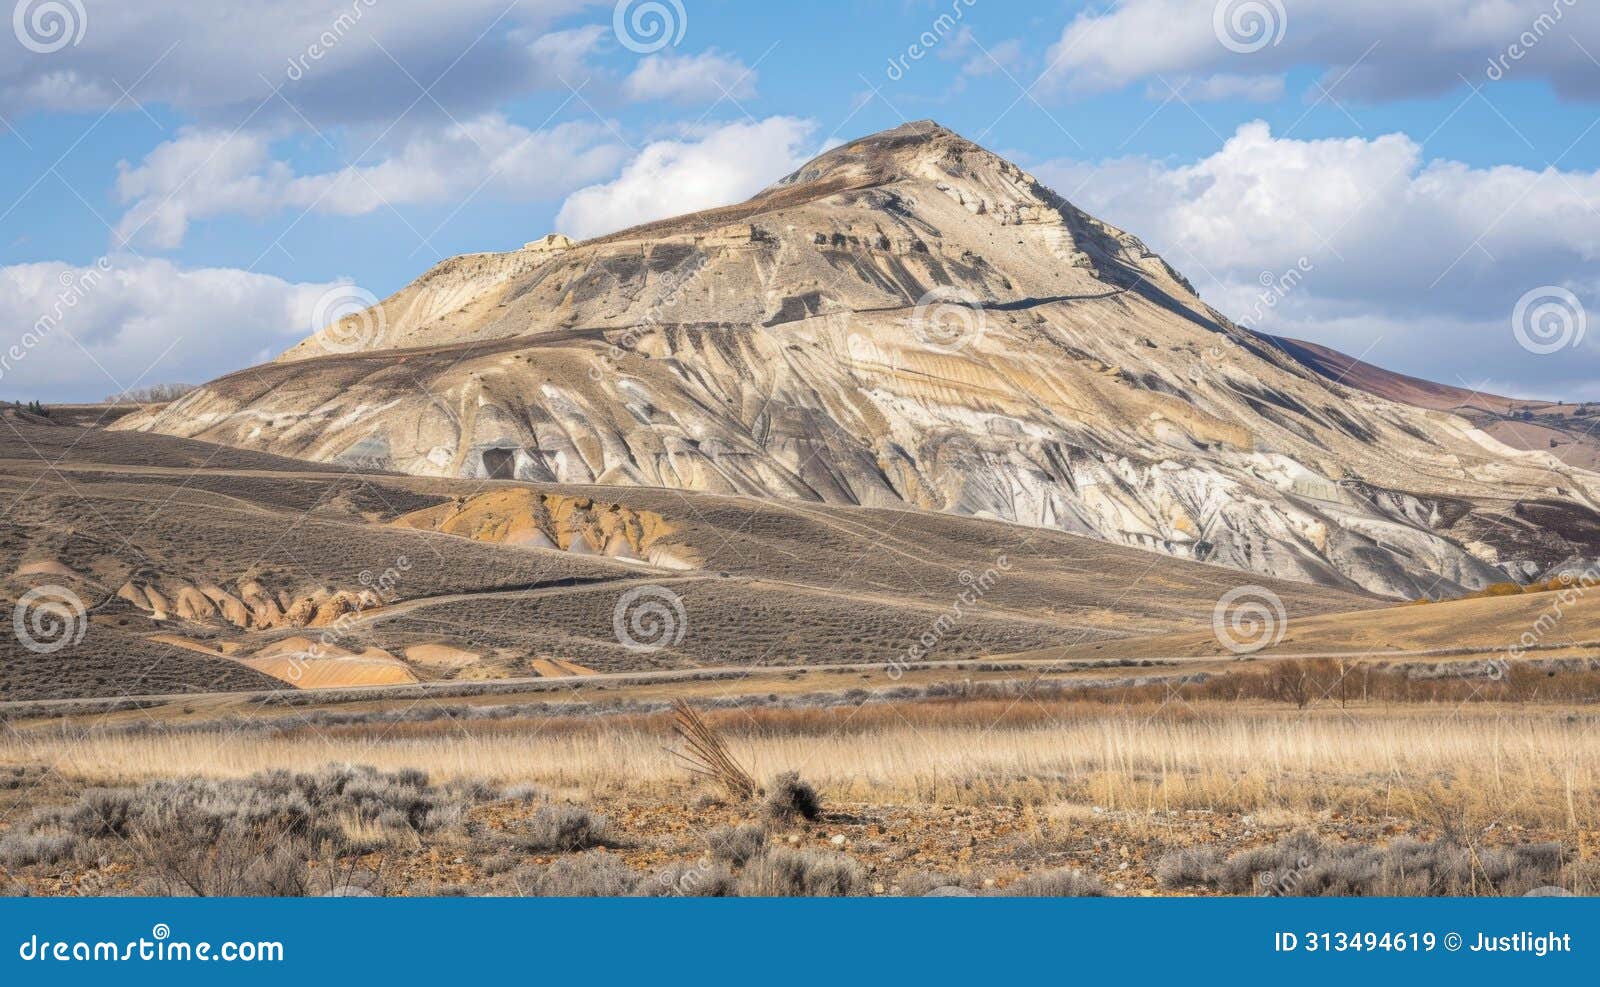 from afar it appears that the mountain has been painted with a haphazard brush as streaks of exposed earth and piles of